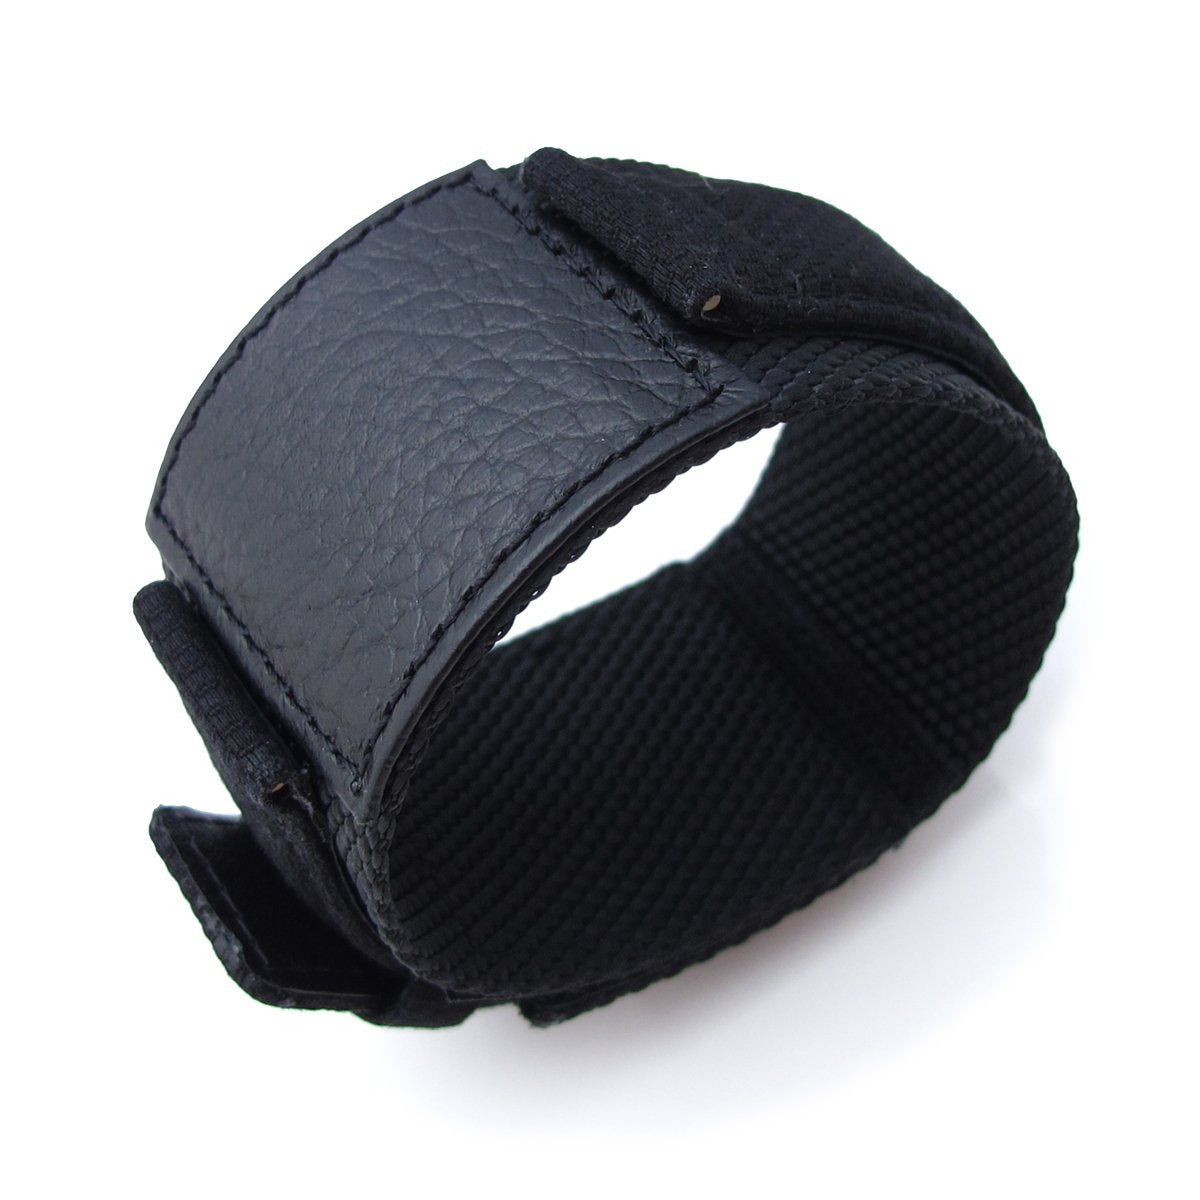 MiLTAT 24mm Double Layer Nylon Black Tactical Velcro Watch Strap design for 44mm Panerai Watches Strapcode Watch Bands